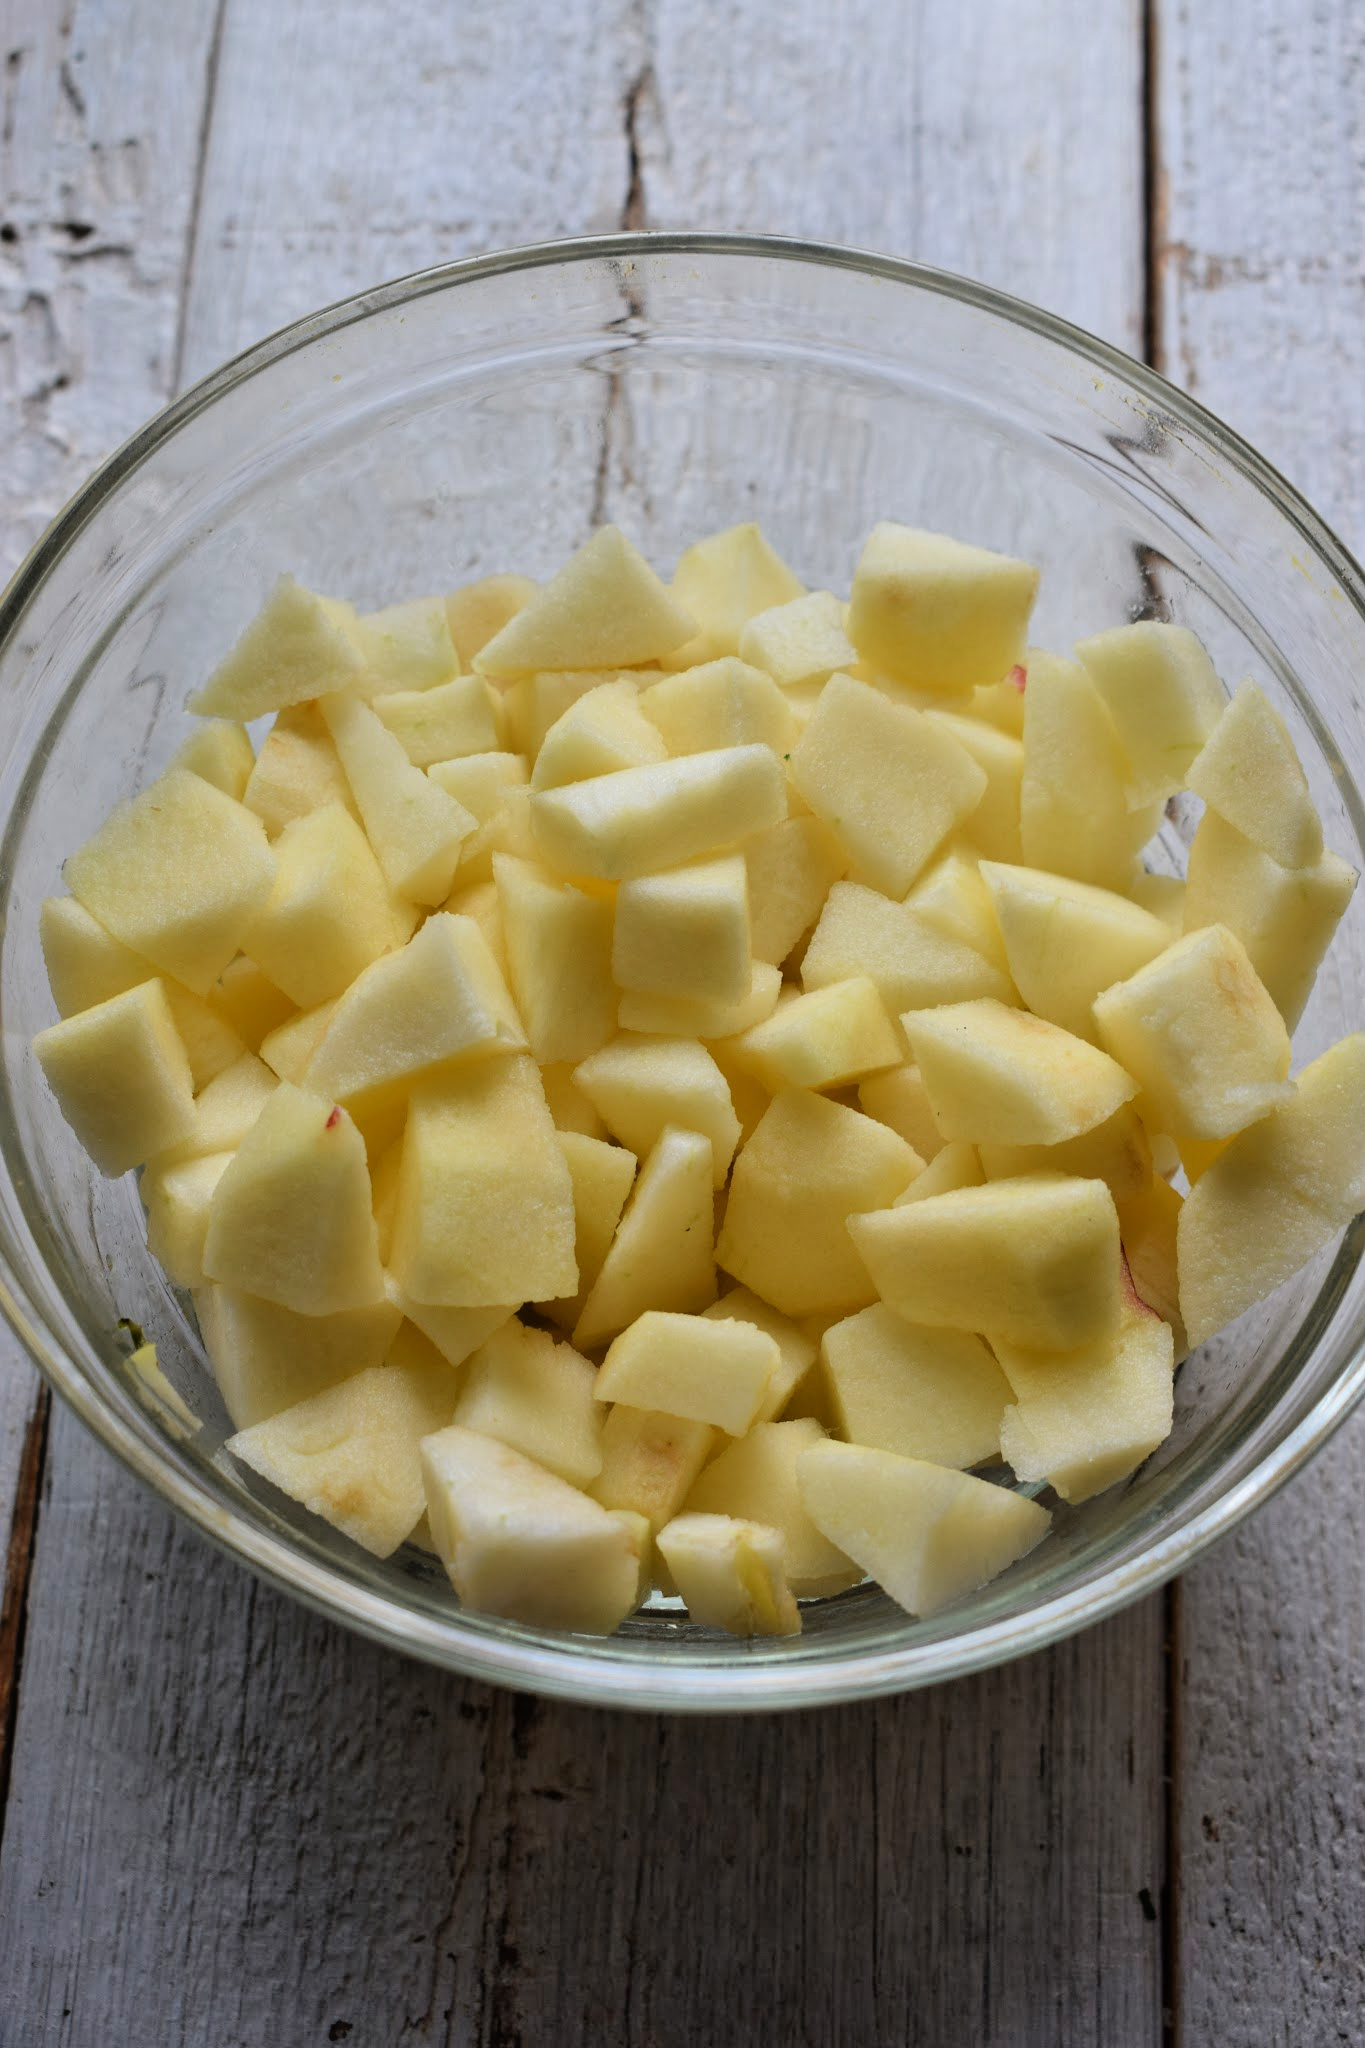 diced apples in a bowl.